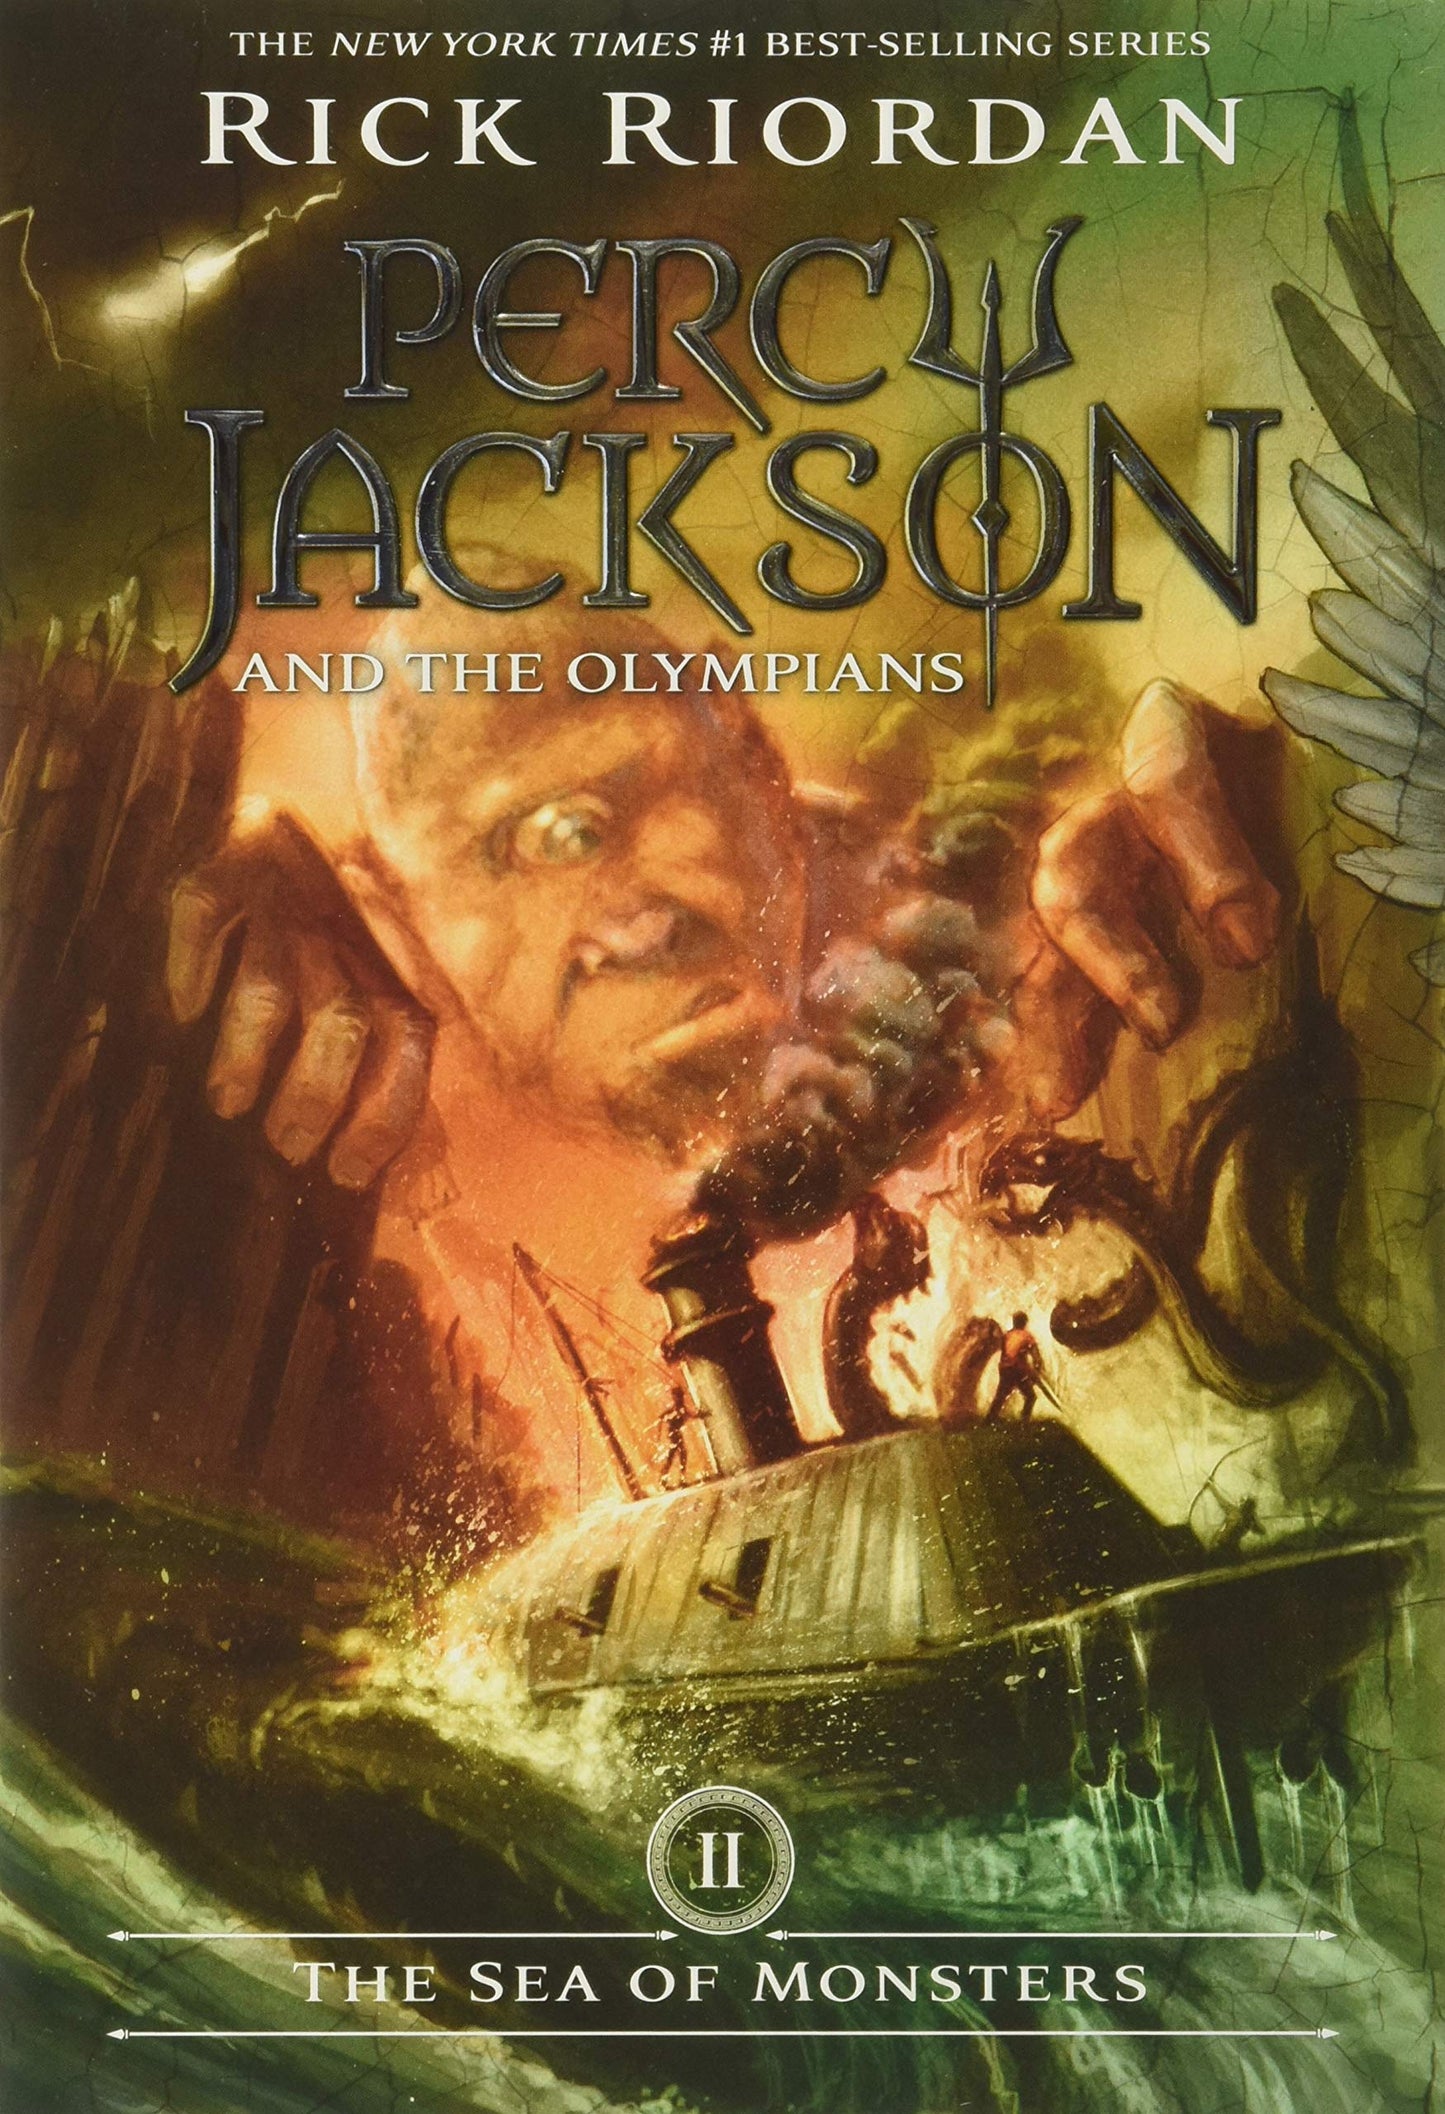 The Sea of Monsters (Percy Jackson and the Olympians #2)